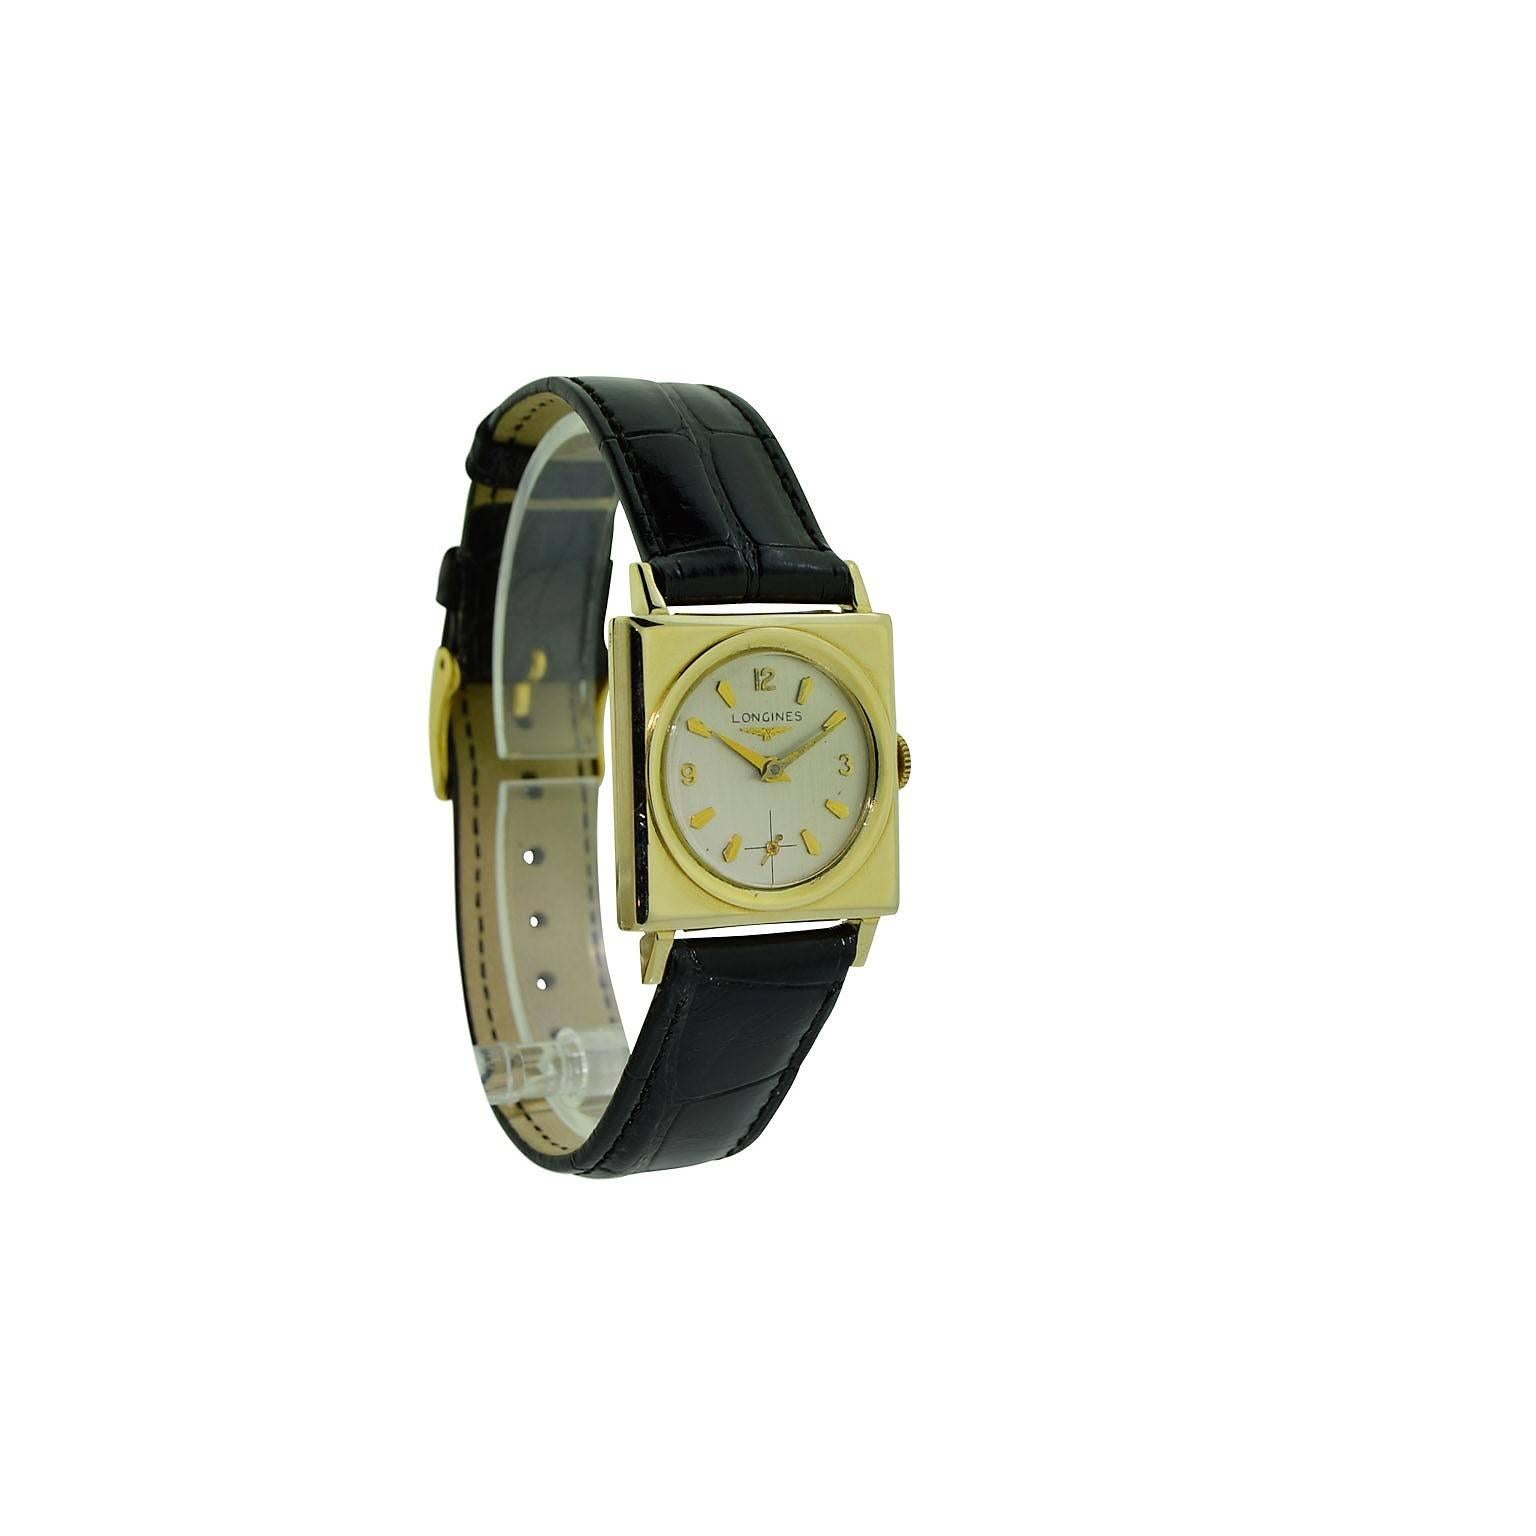 FACTORY / HOUSE:  Longines Watch Company
STYLE / REFERENCE: Art Deco / Circle in a Square
METAL / MATERIAL:   14 Kt Yellow Gold 
DIMENSIONS:  36 mm  X 25 mm
CIRCA:  1955 / 1956
MOVEMENT / CALIBER:  Manual Winding / 17 Jewels / 22 L Cal. 
DIAL /